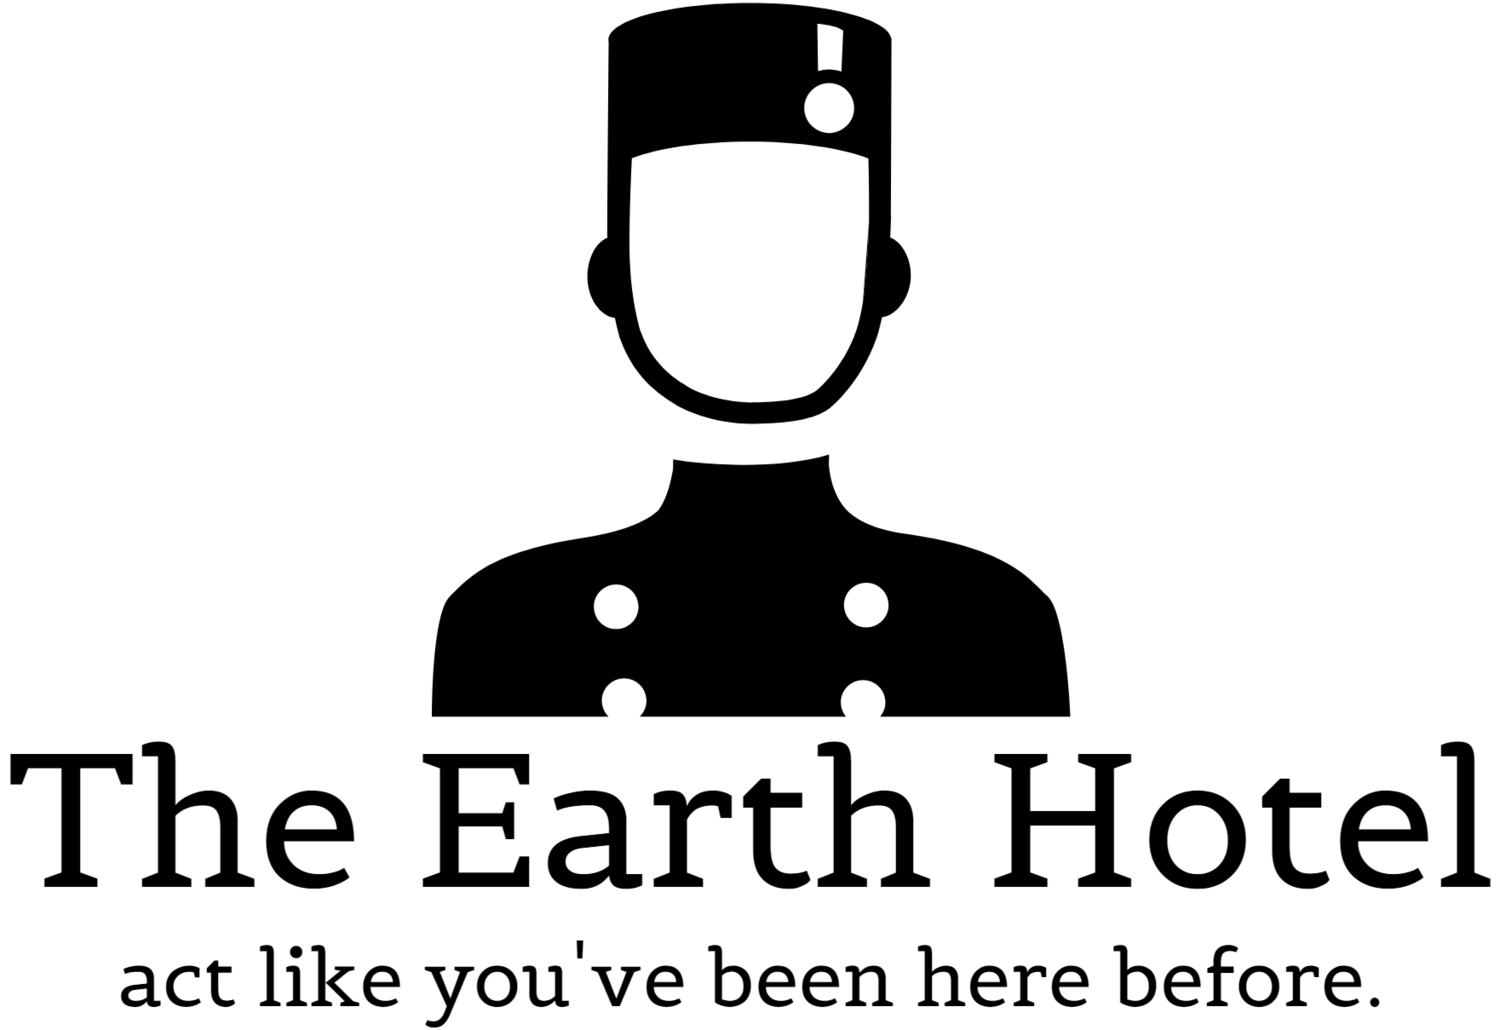 The Earth Hotel